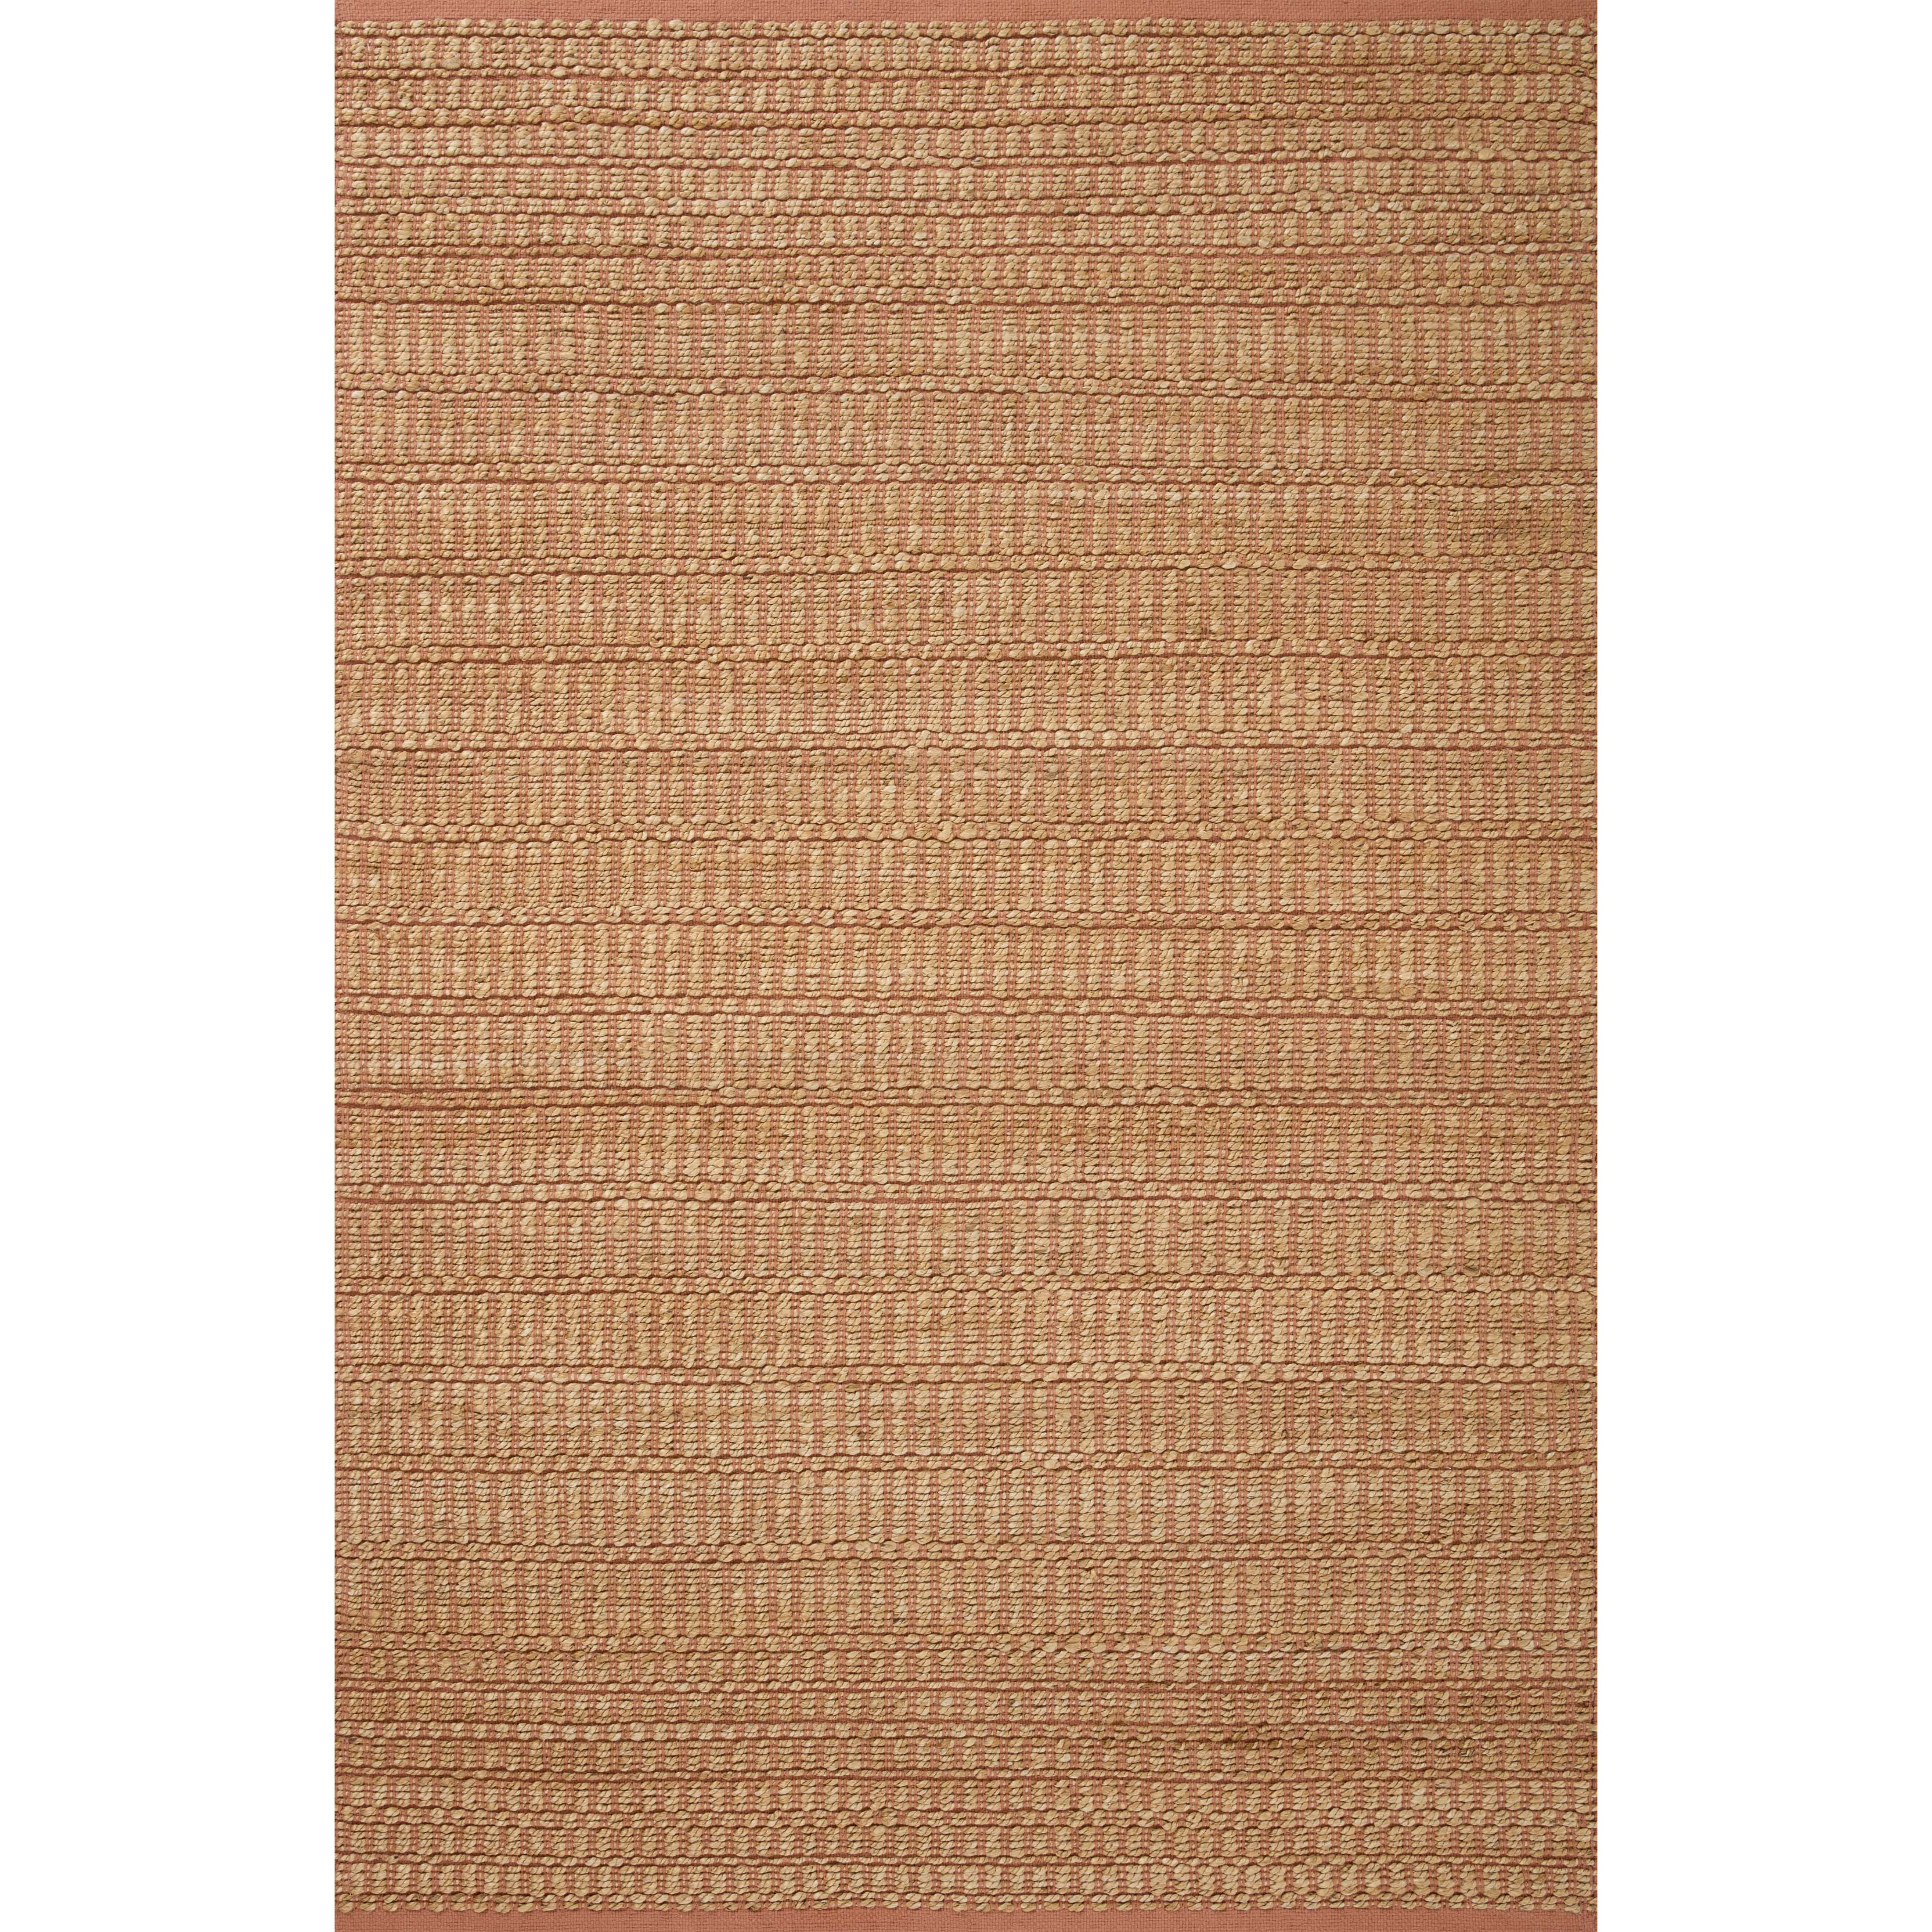 The Angela Rose x Loloi Colton Natural / Clay Rug is a new take on the staple jute rug, blended with cotton for added softness. In a range of linear designs in modern earth tones, Colton can add visual interest to a room or serve as a gently textured neutral. Amethyst Home provides interior design services, furniture, rugs, and lighting in the Kansas City metro area.